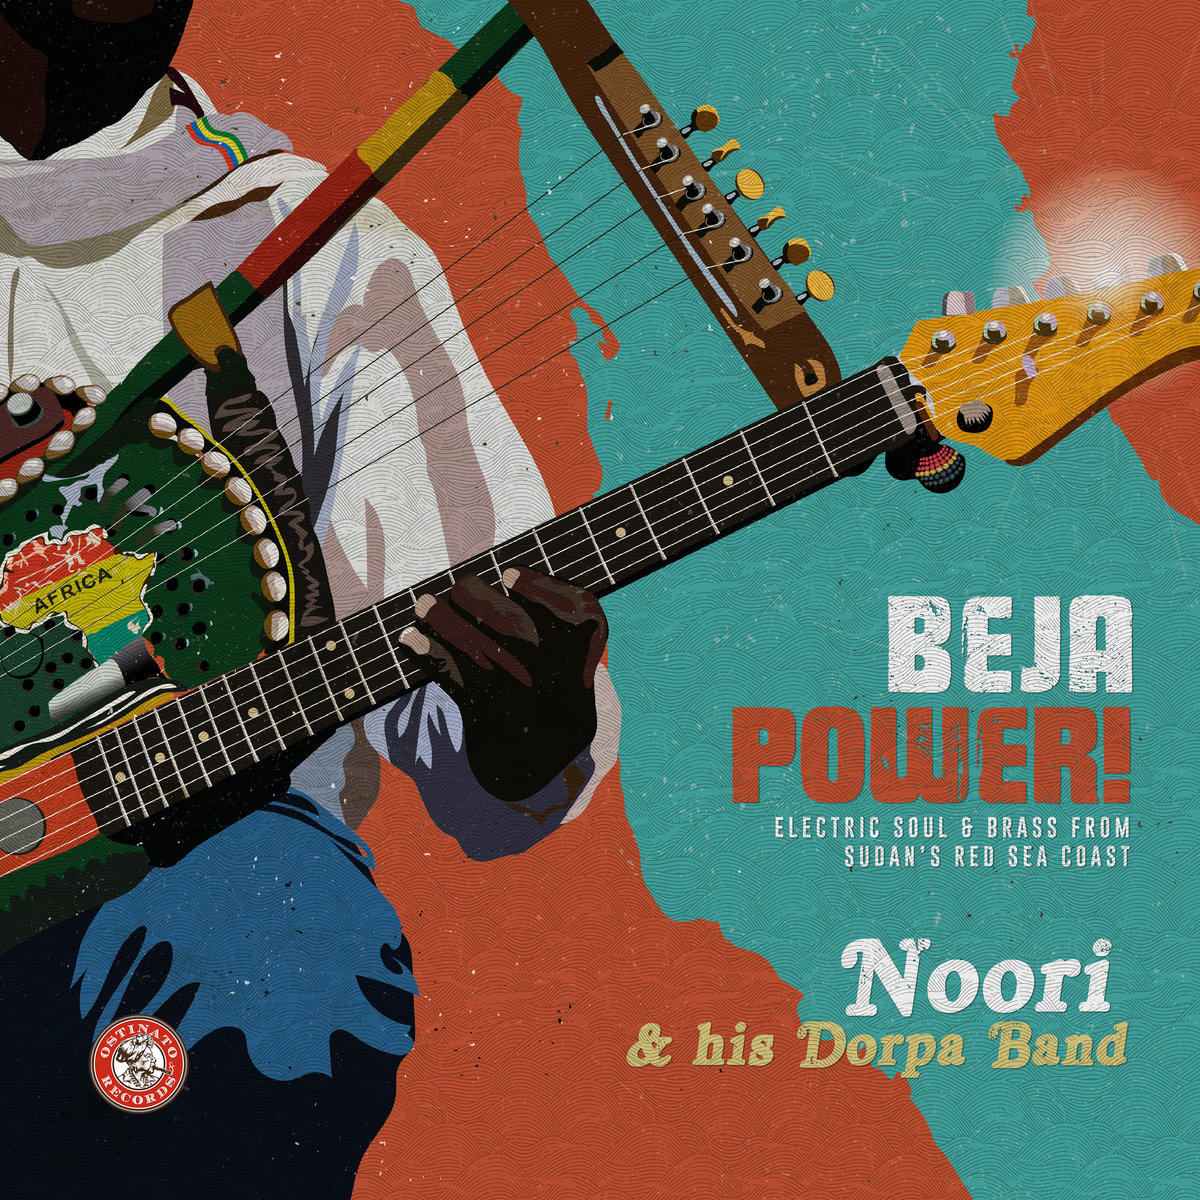 Sea Beja Coast & from Noori | uabab Red Soul His & Sudan\'s Electric Power! Band Dorpa Brass